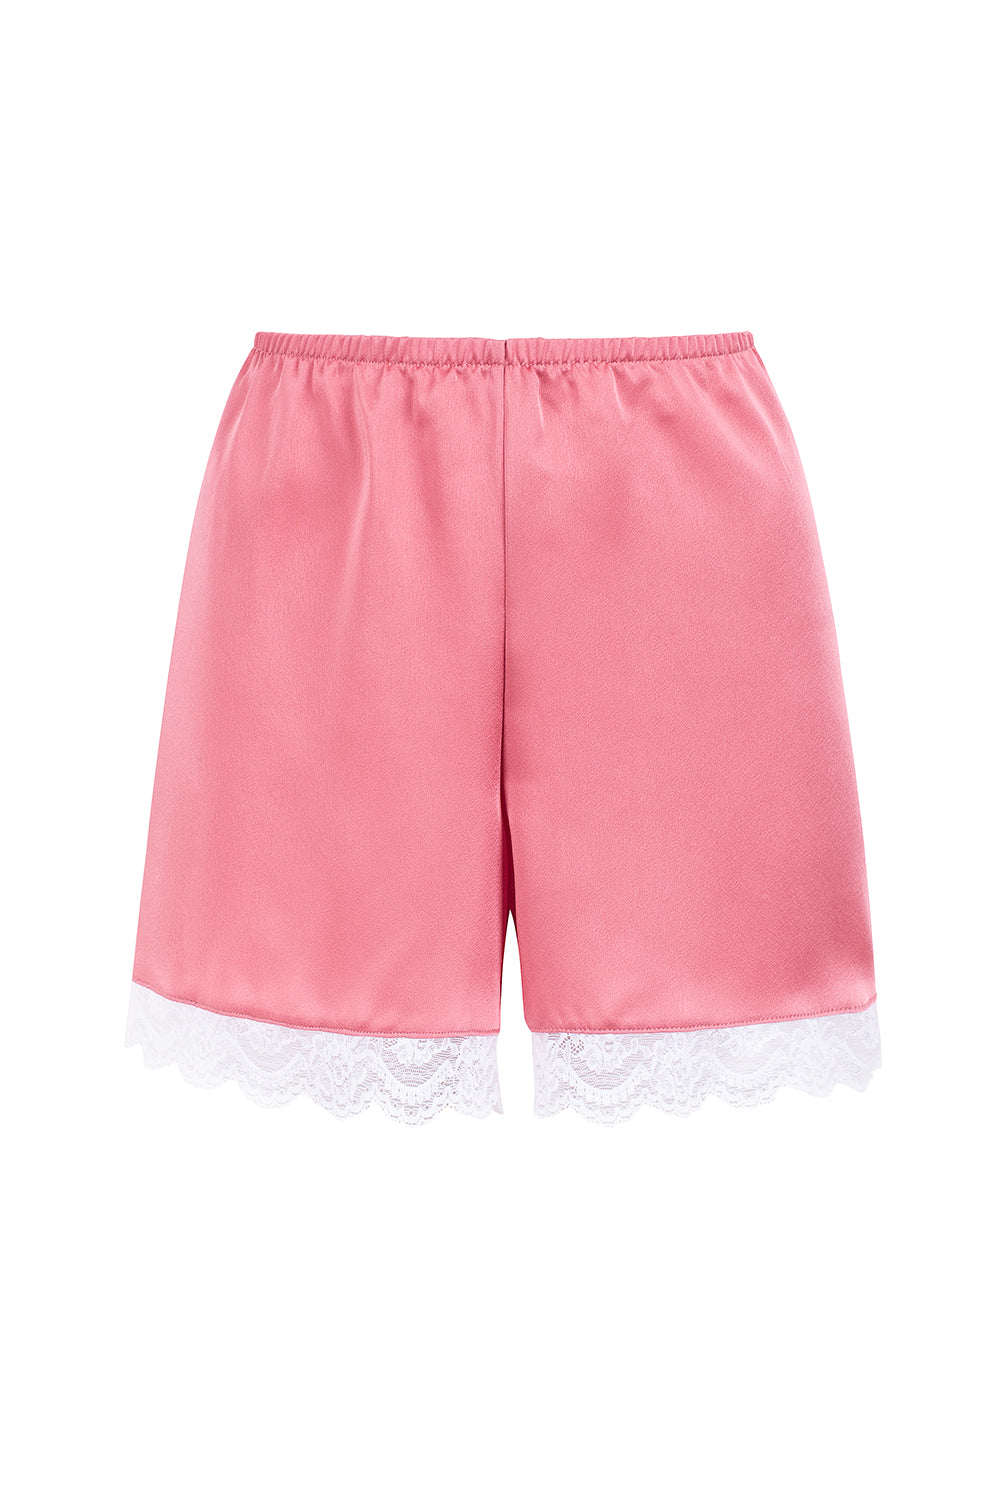 PINK SATIN & LACE SHORTS (OUT OF STOCK)